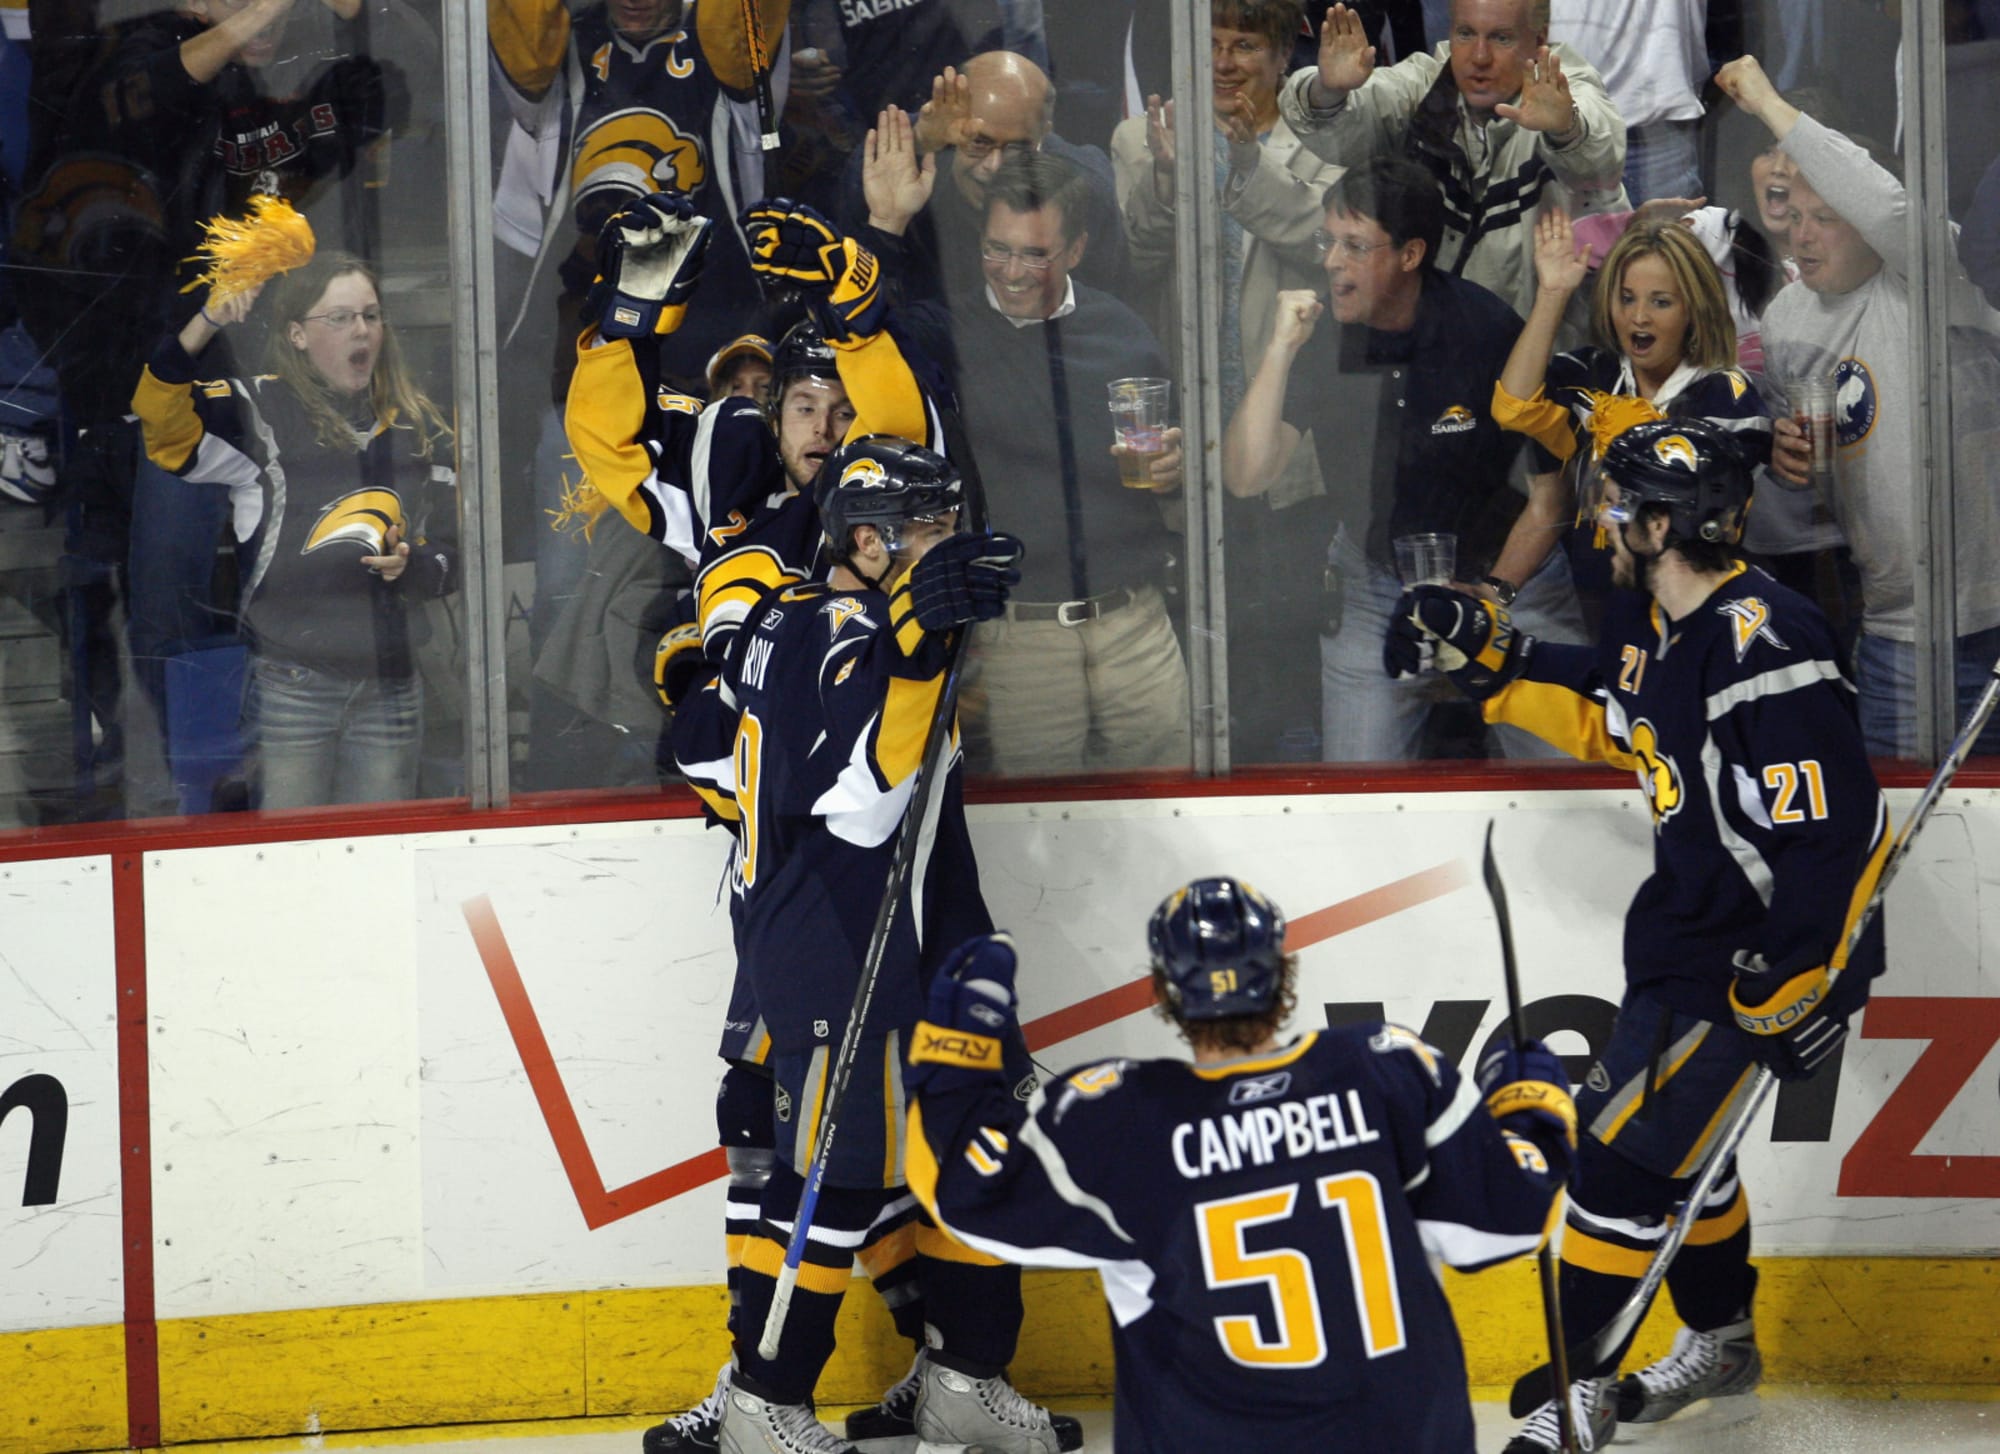 Last time Amerks got this far, Sabres closed in on Cup